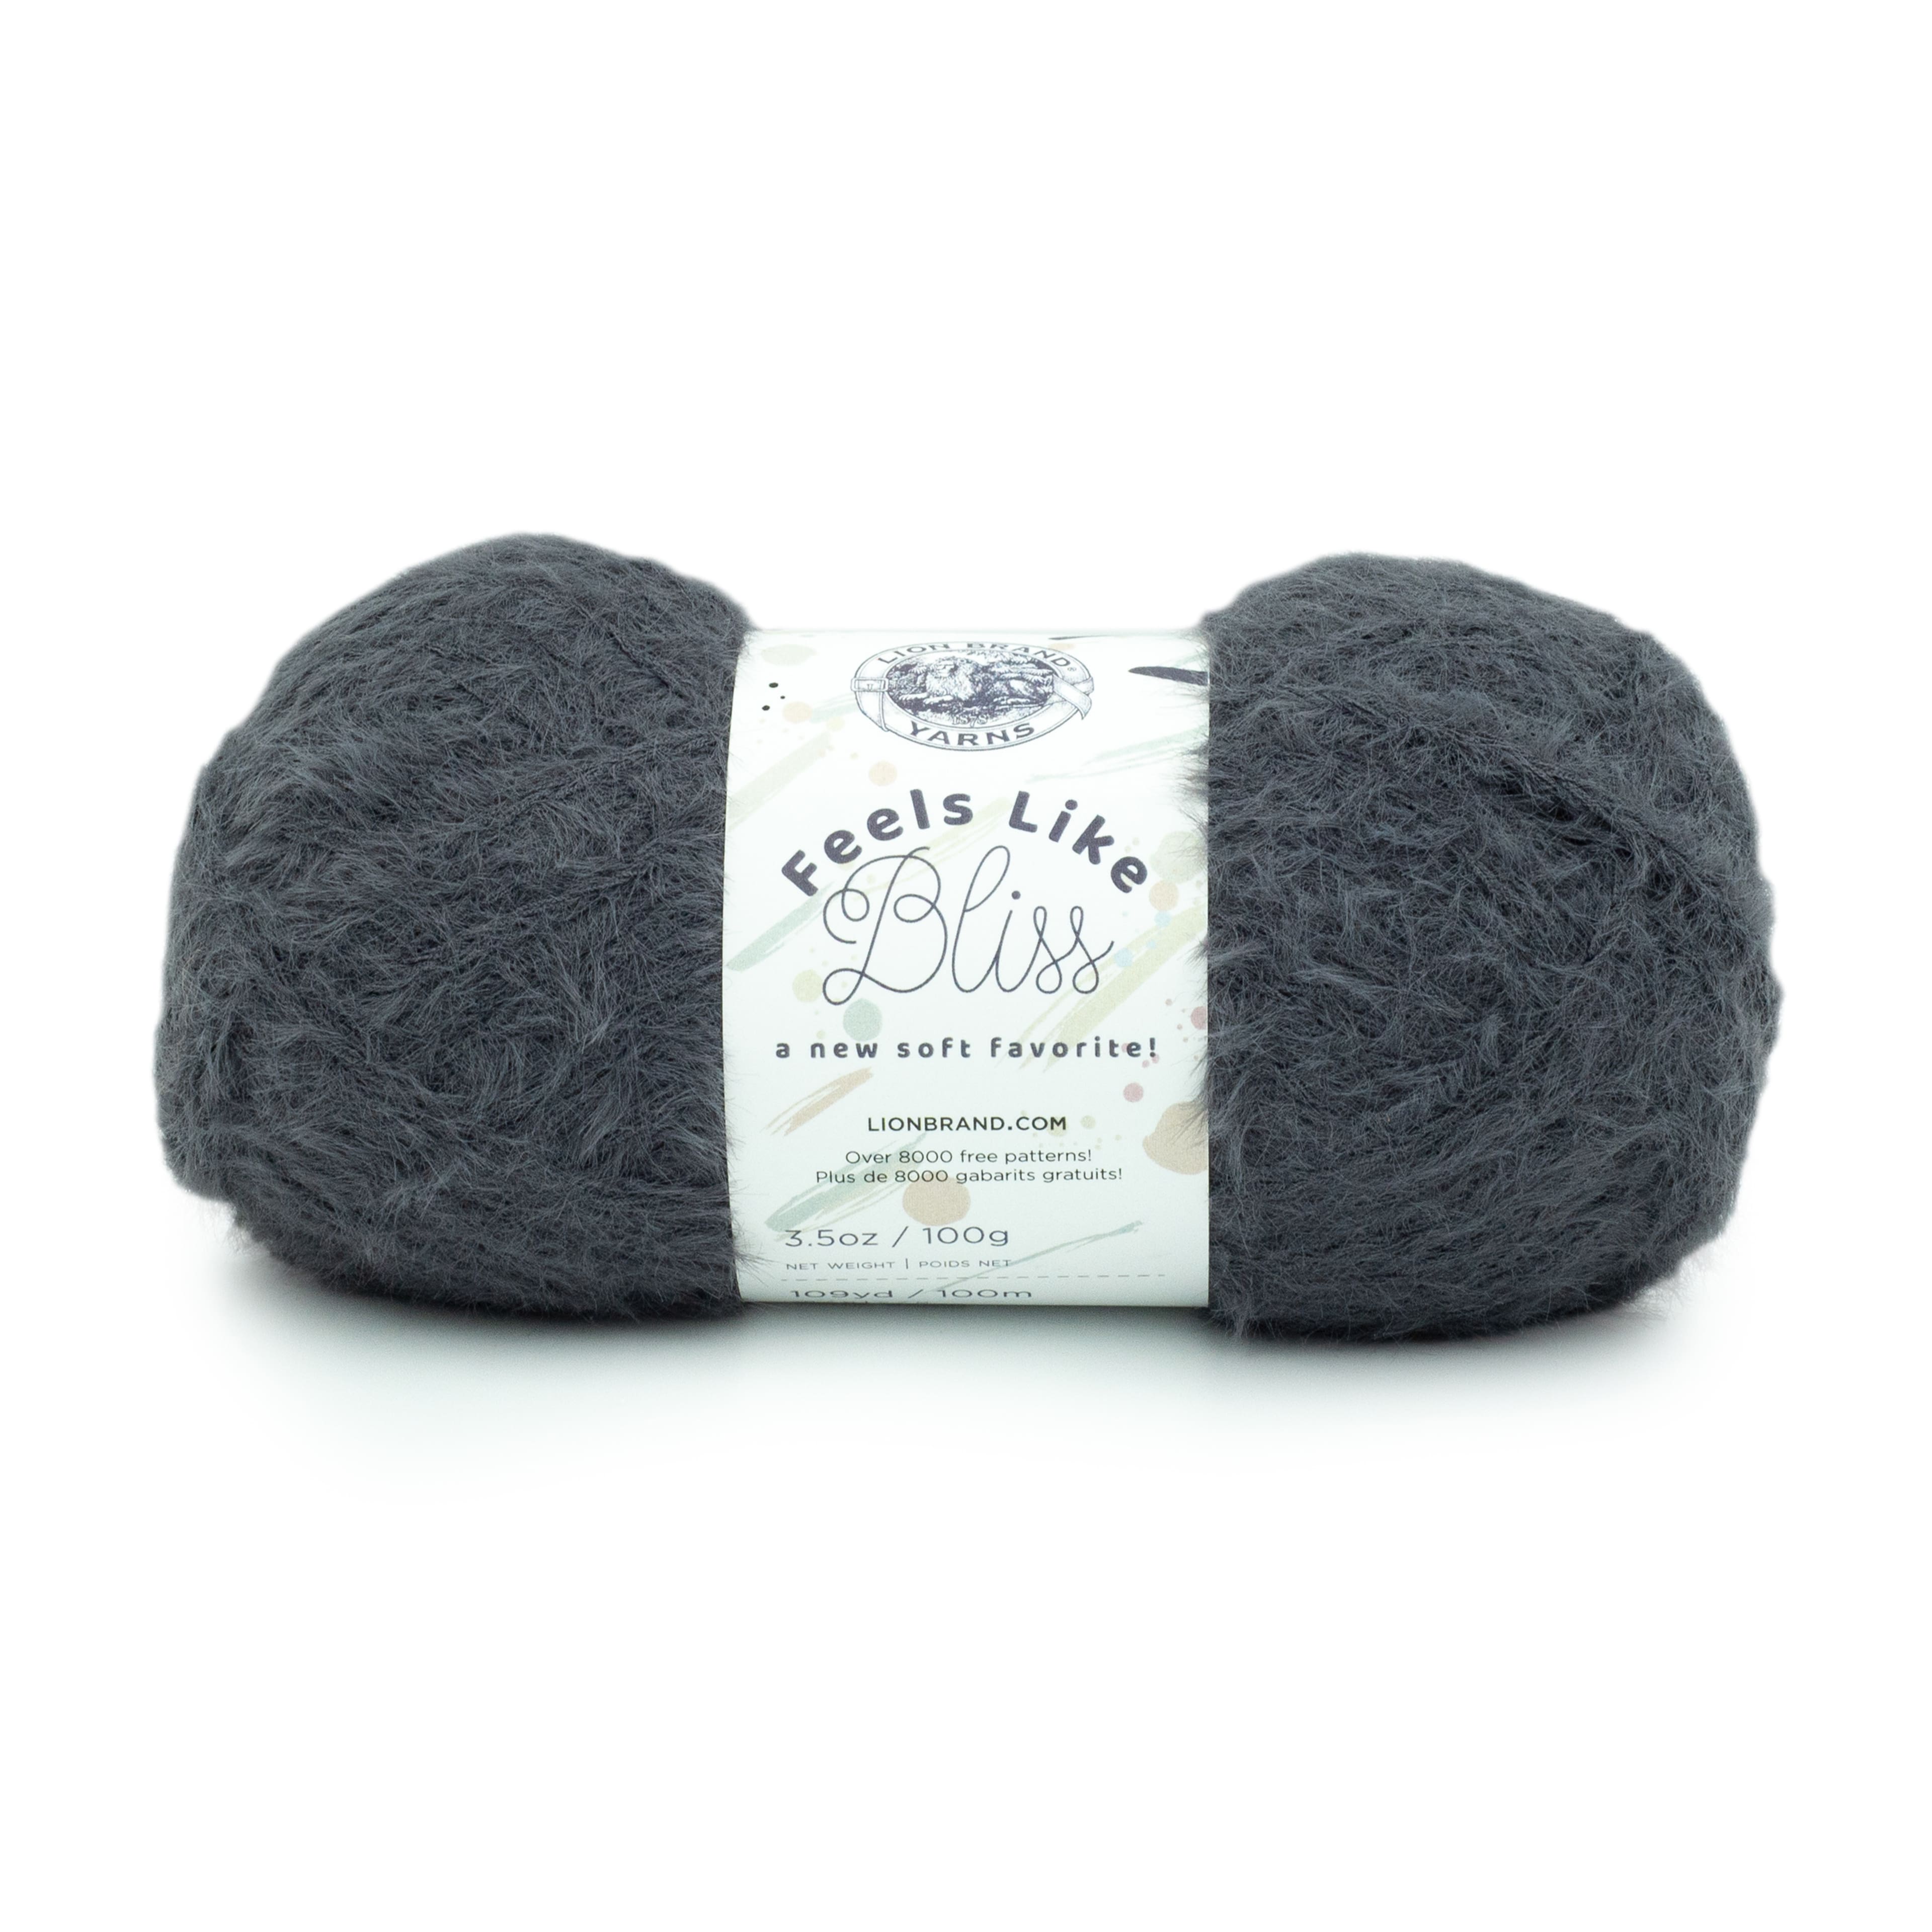 Lion Brand Feels Like Bliss Yarn Review - Is It As Blissful As It's Name  Implies? 